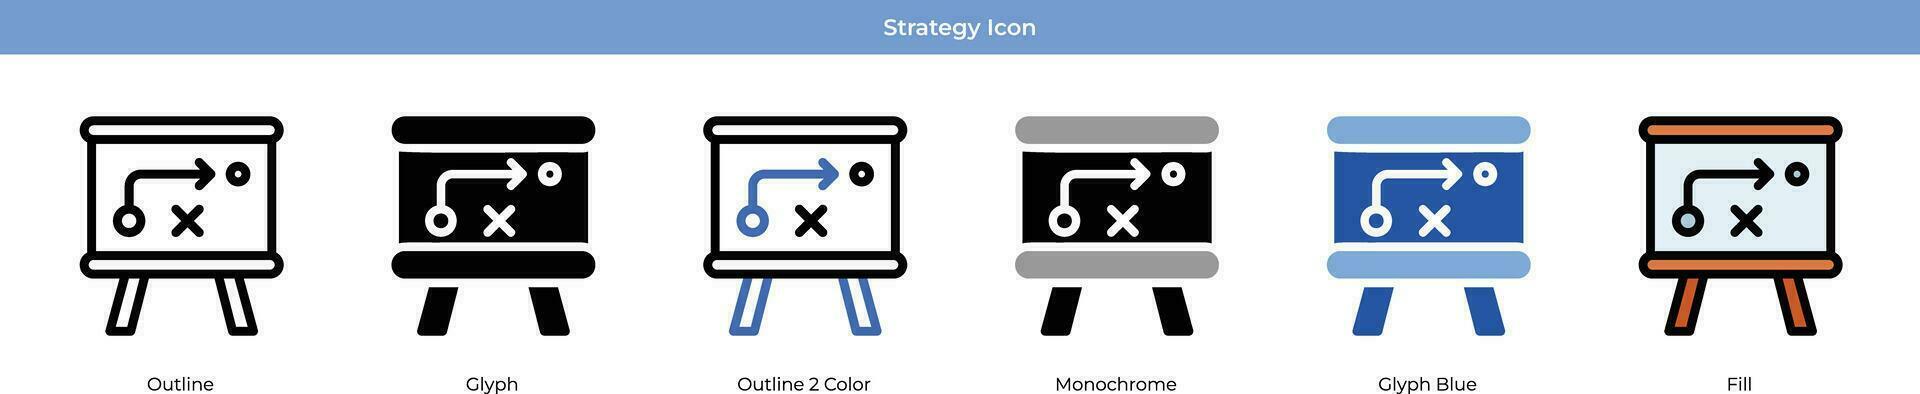 Strategy Icon Set vector